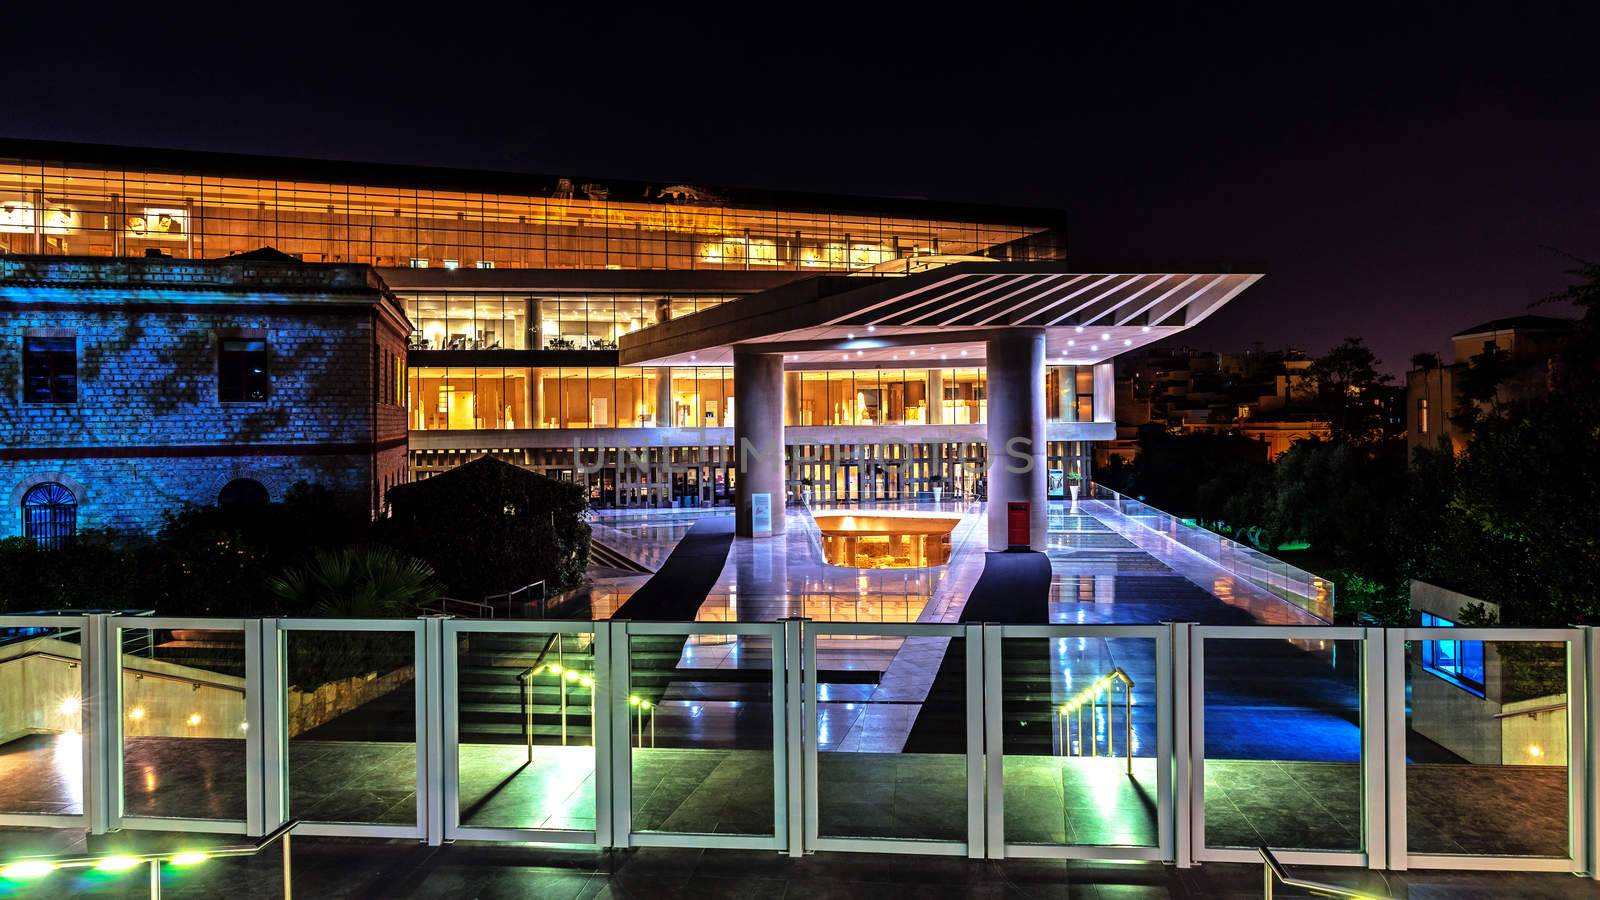 Night view of The Acropolis Museum,  an archaeological institution focused on the findings of the archaeological site of the Acropolis of Athens.